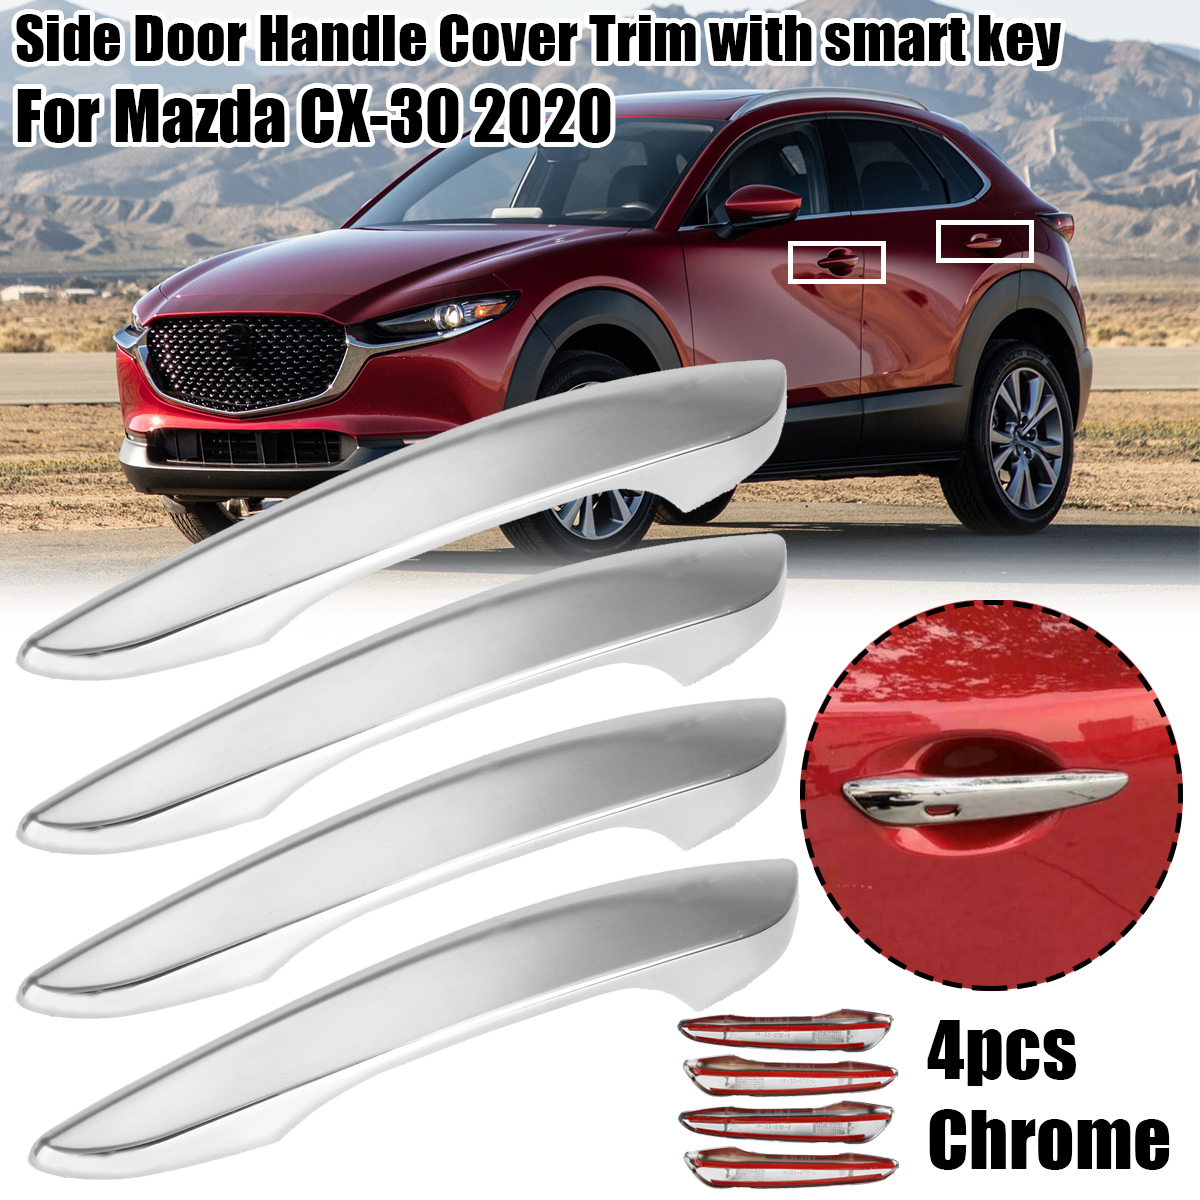 Chrome-Handle-Protective-Cover-Door-Handle-Outer-Bowls-Trim-For-Mazda-CX-30-2020-1751667-6